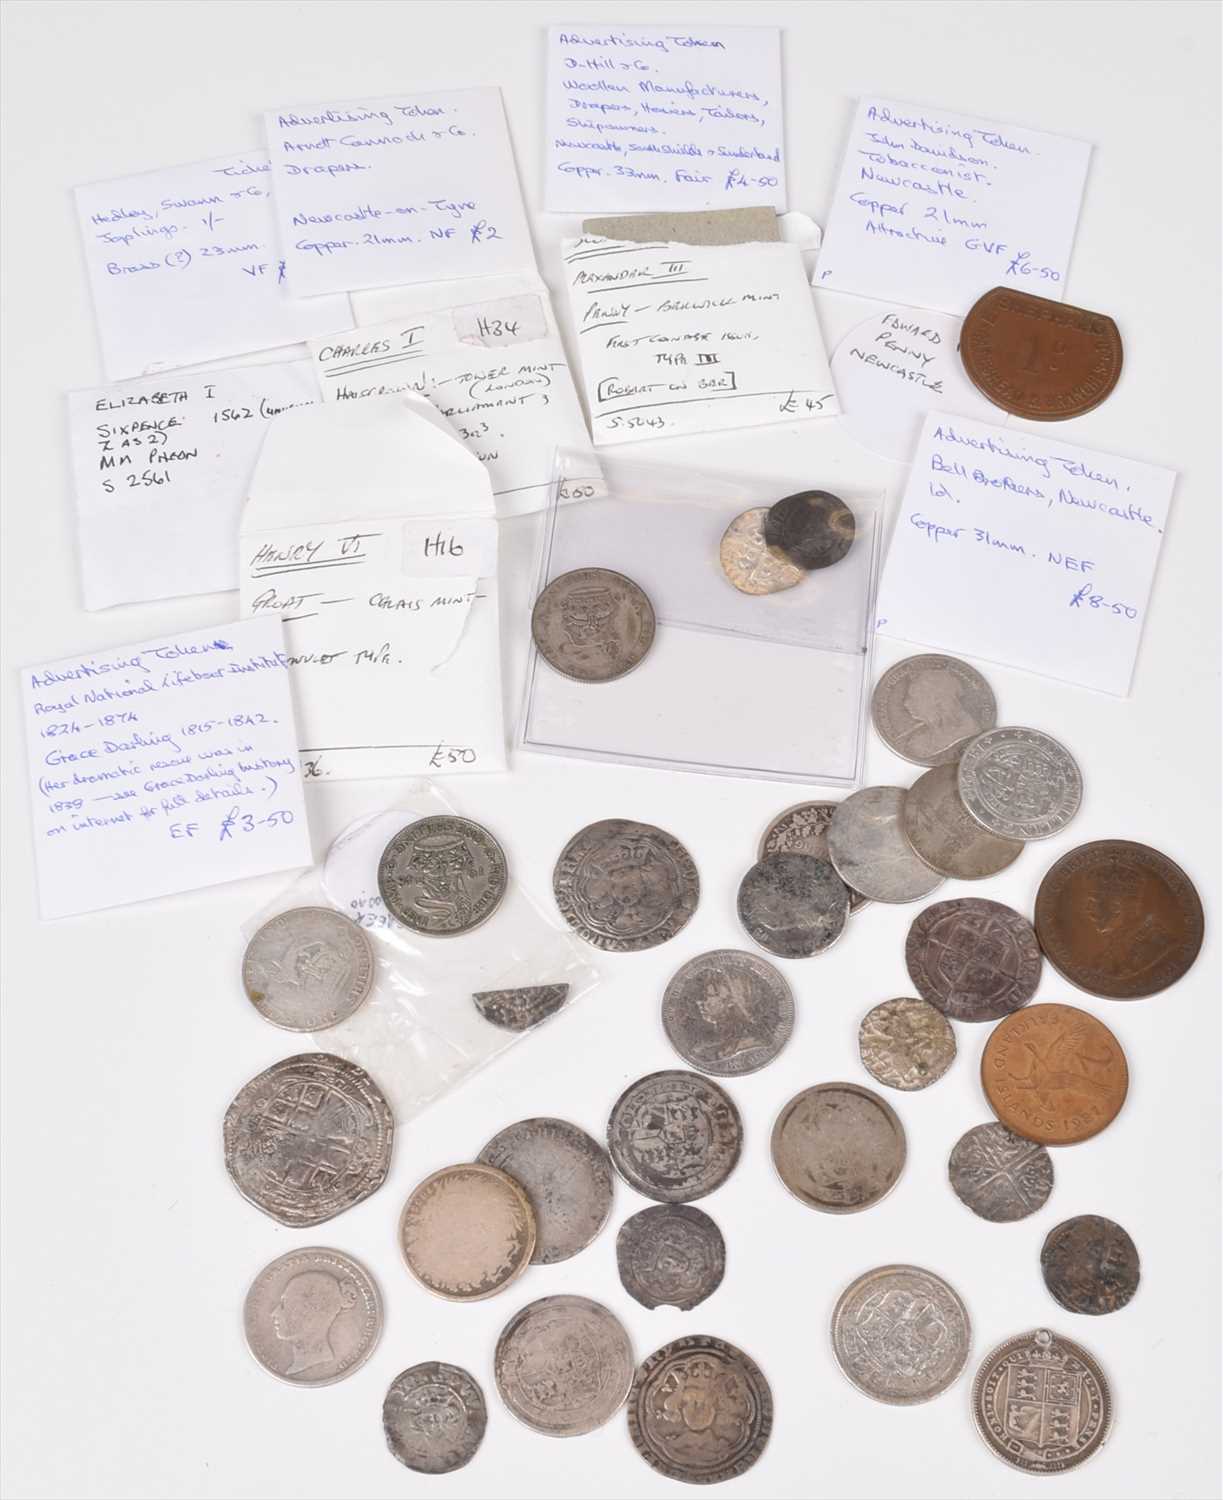 Lot 1 - Hammered coins with silver Shillings and others.